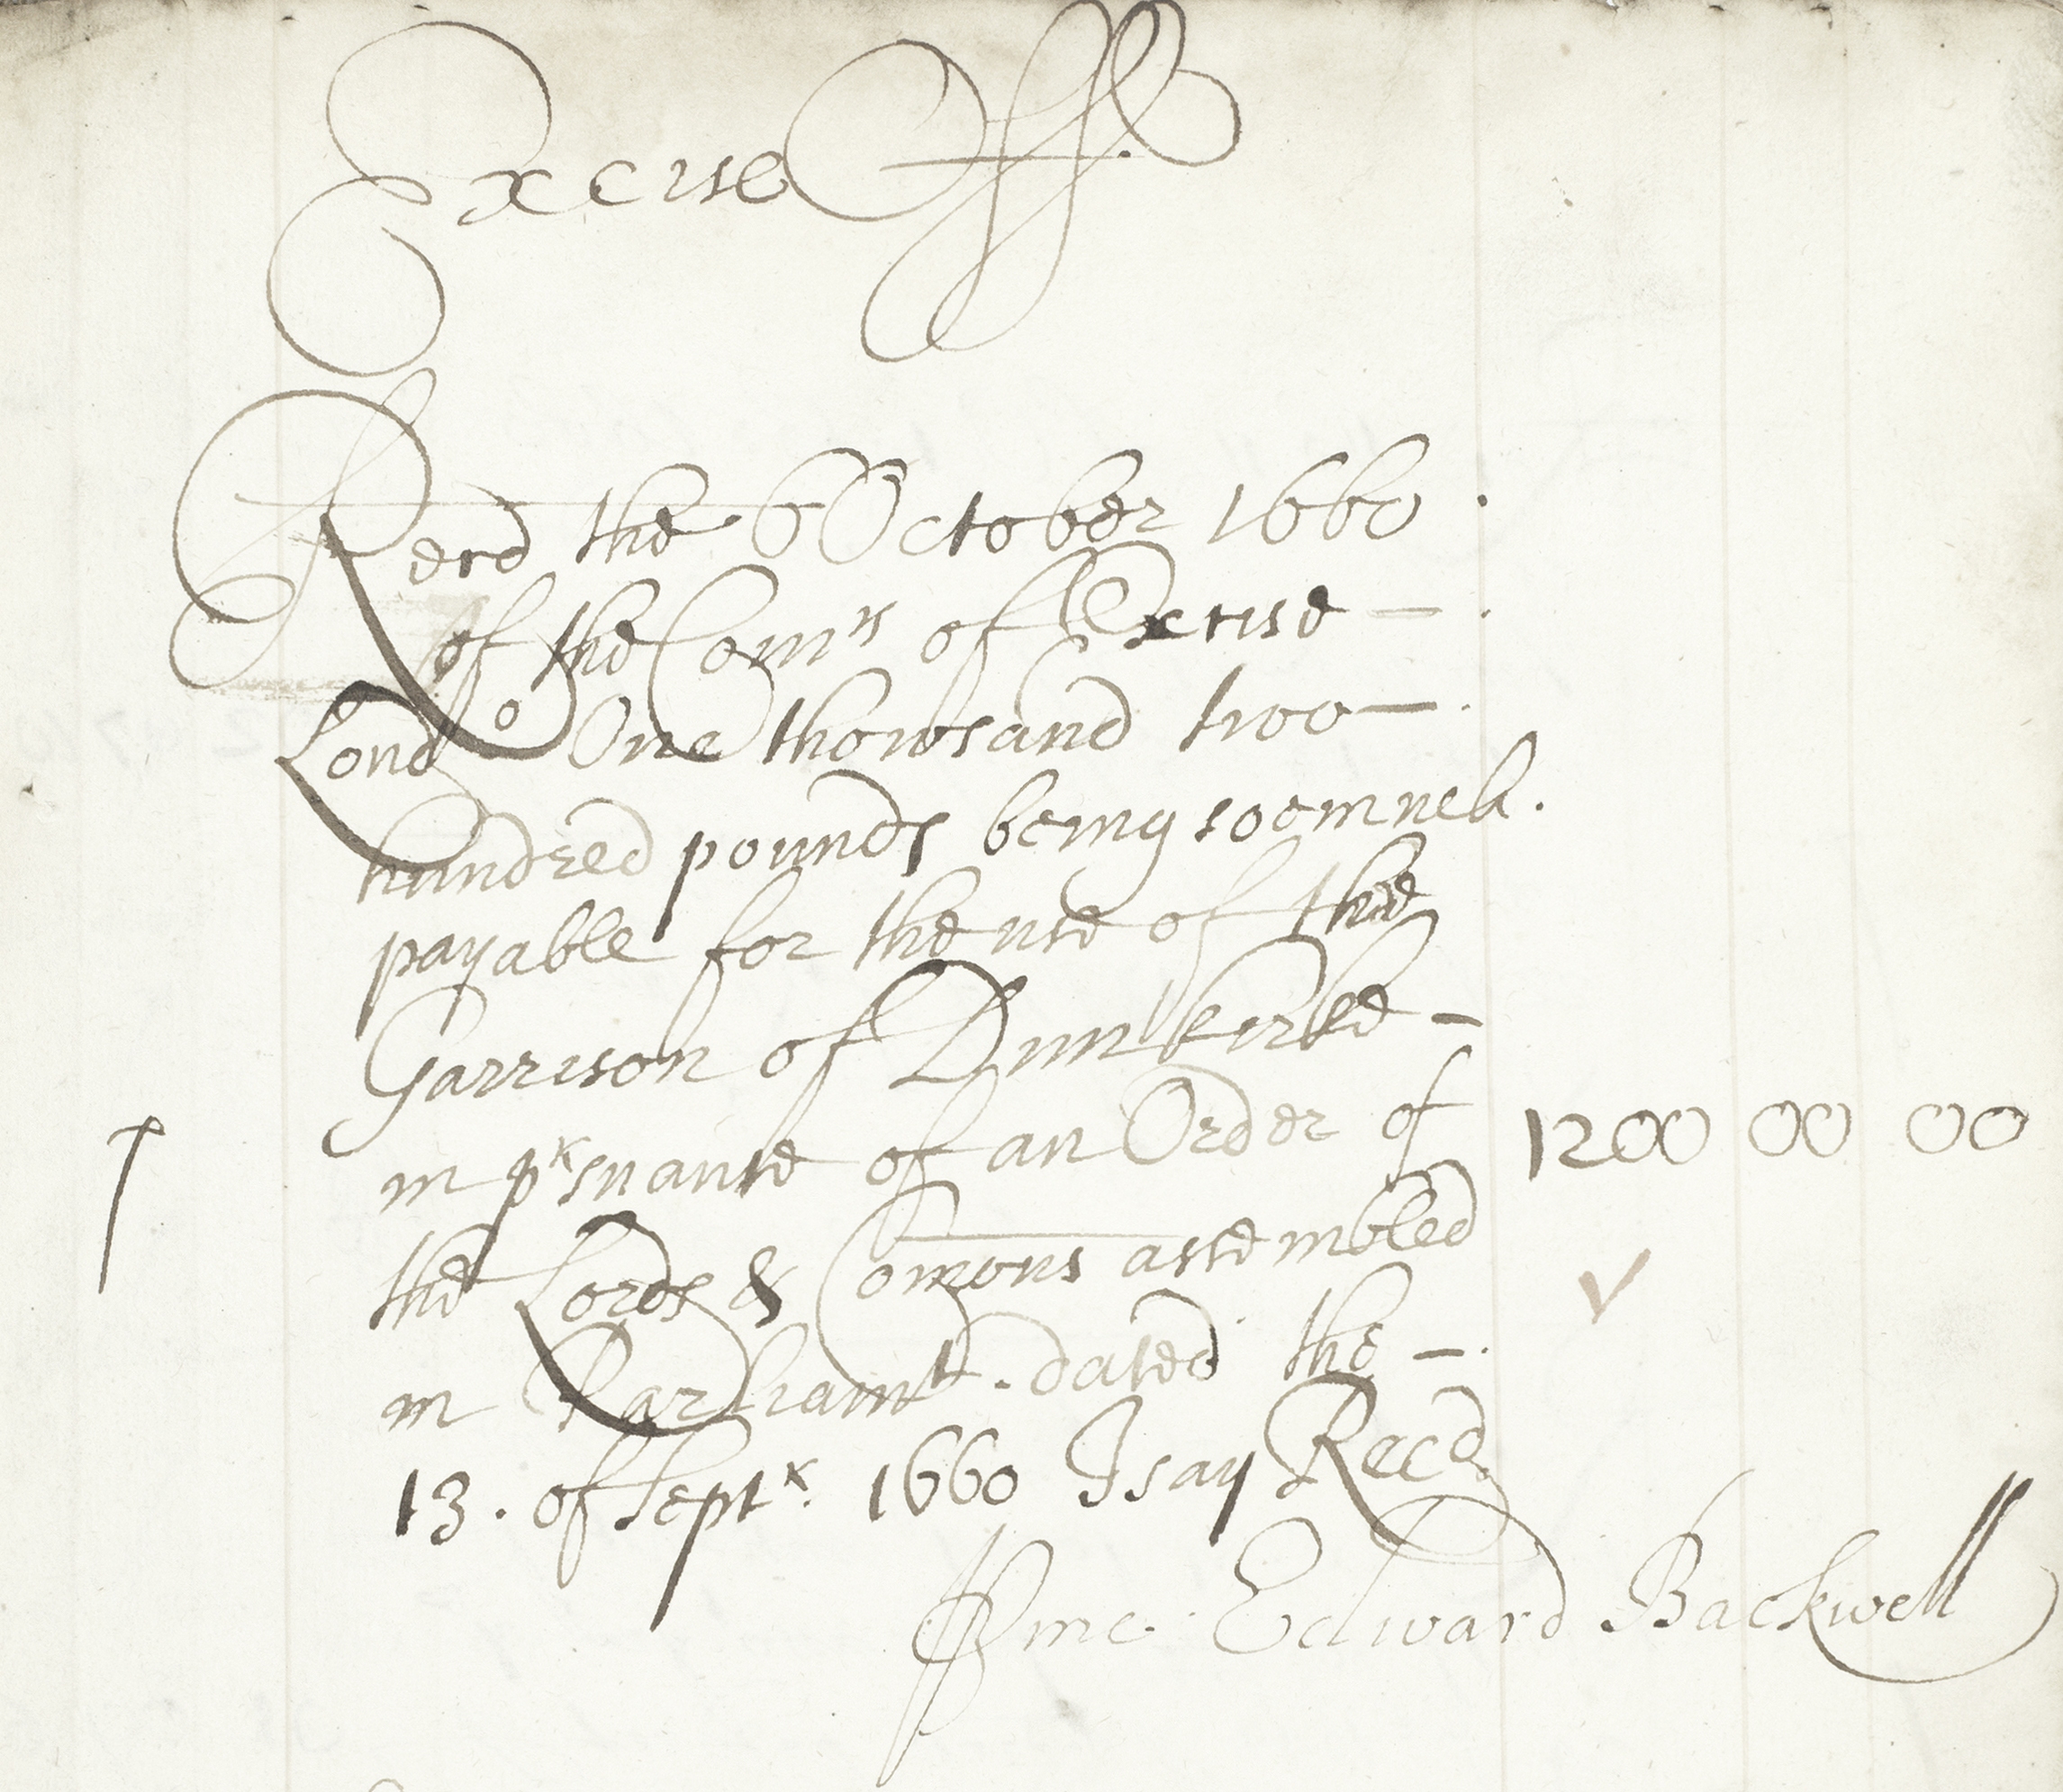 BANKING AND GOVERNMENT – EDWARD BACKWELL Banking ledger kept in person by Edward Backwell, Excise... - Image 2 of 7